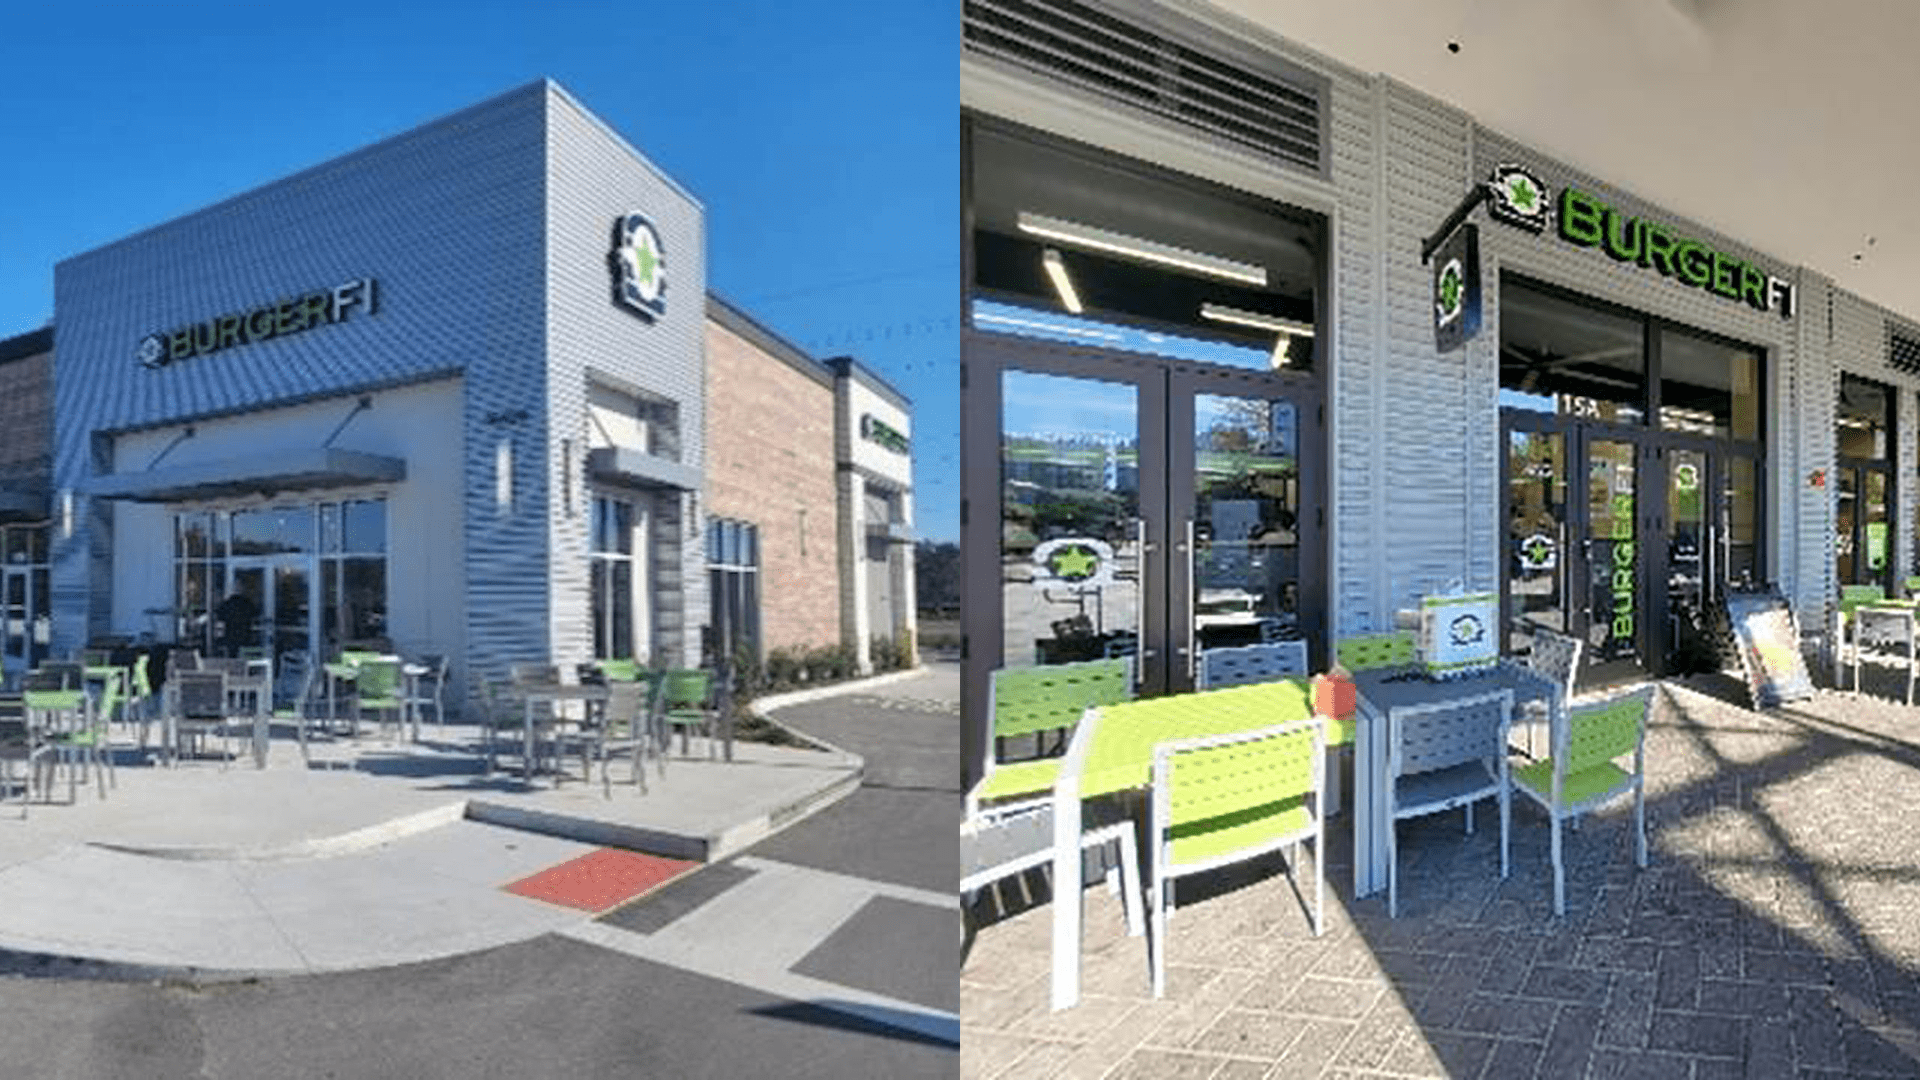 exterior of two fast casual burger restaurants with green logos on the front